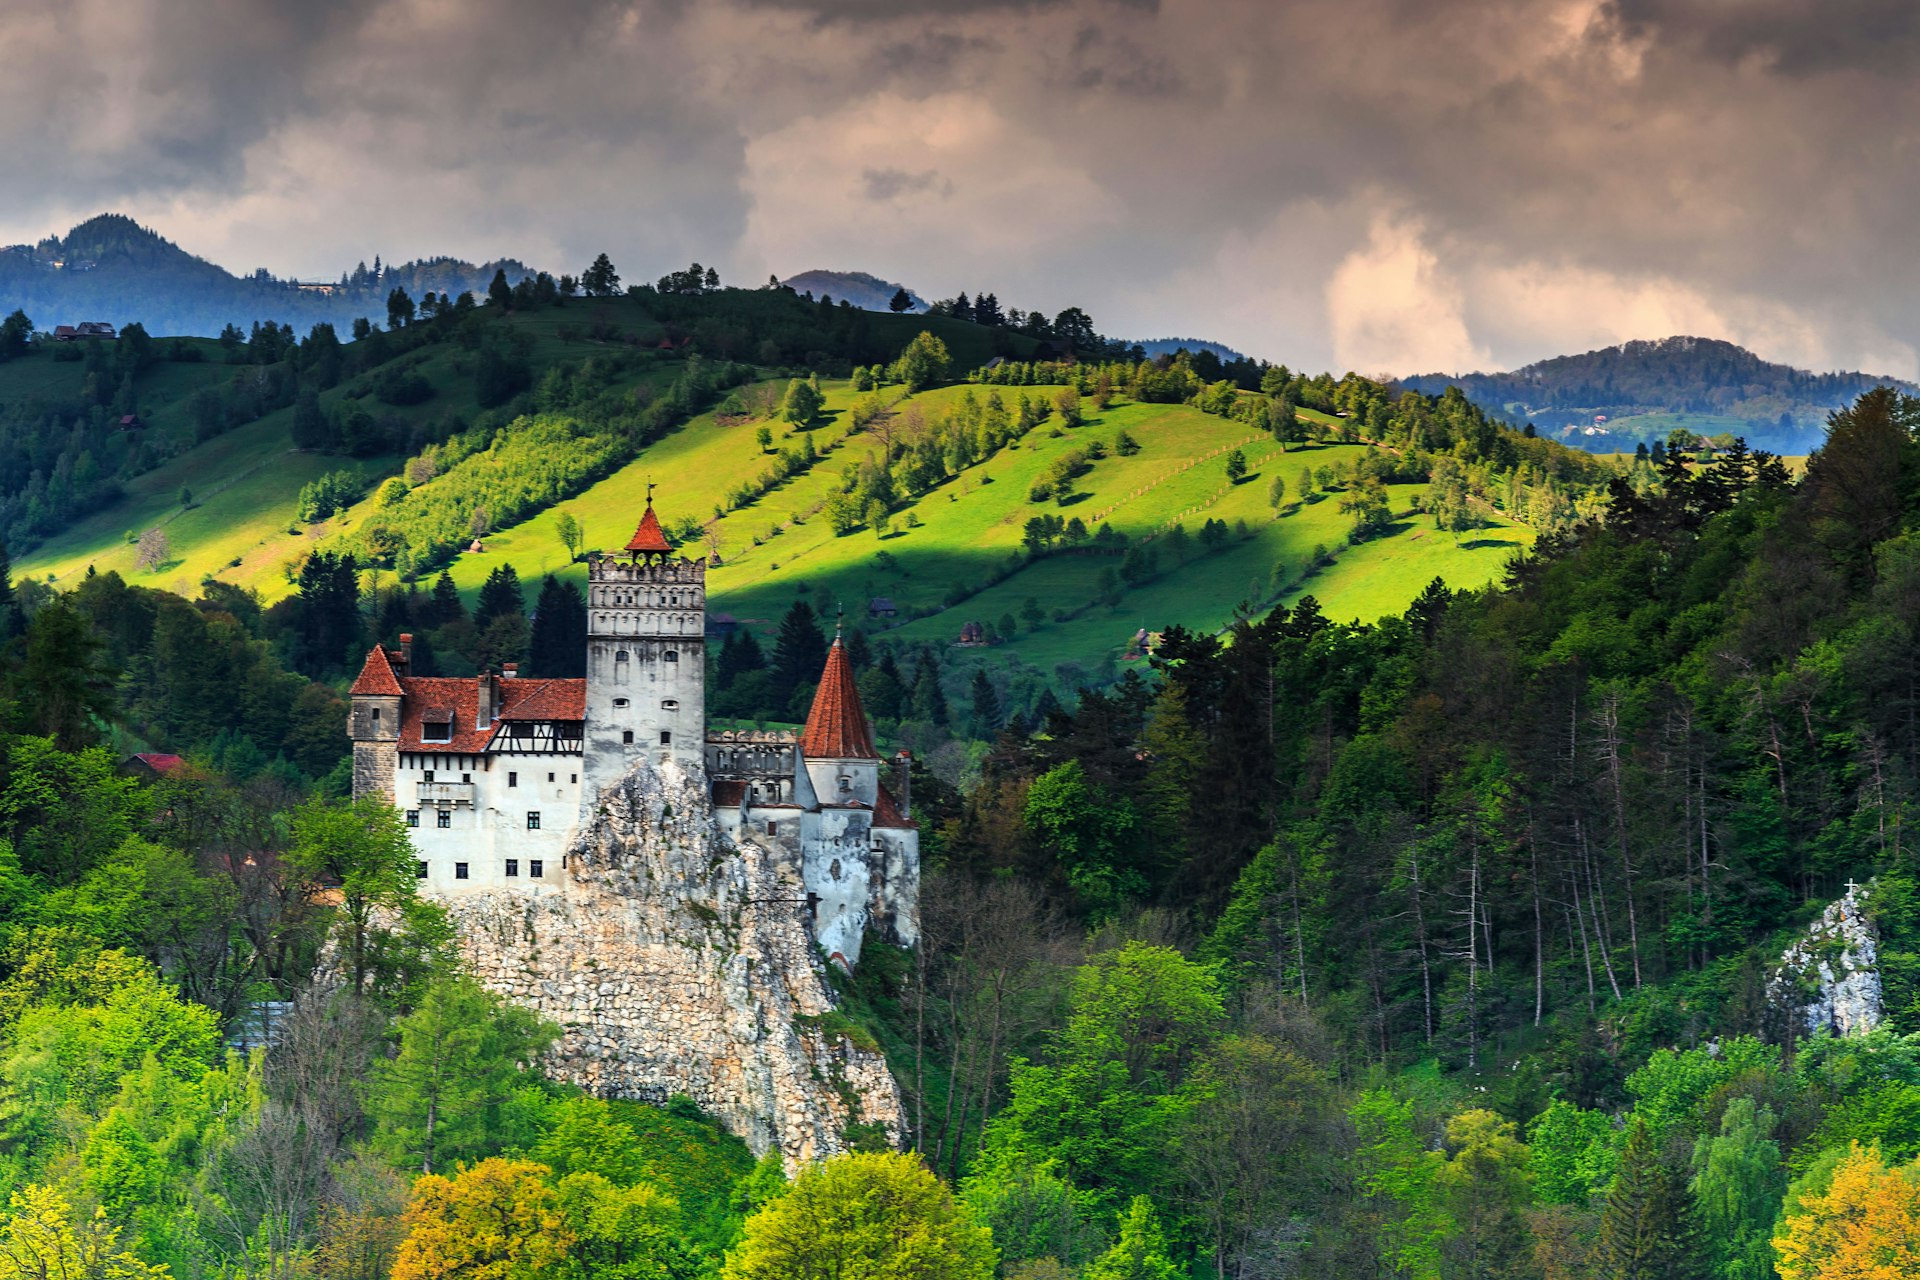 A castle on a hill stands in front of a lush mountainous area. 